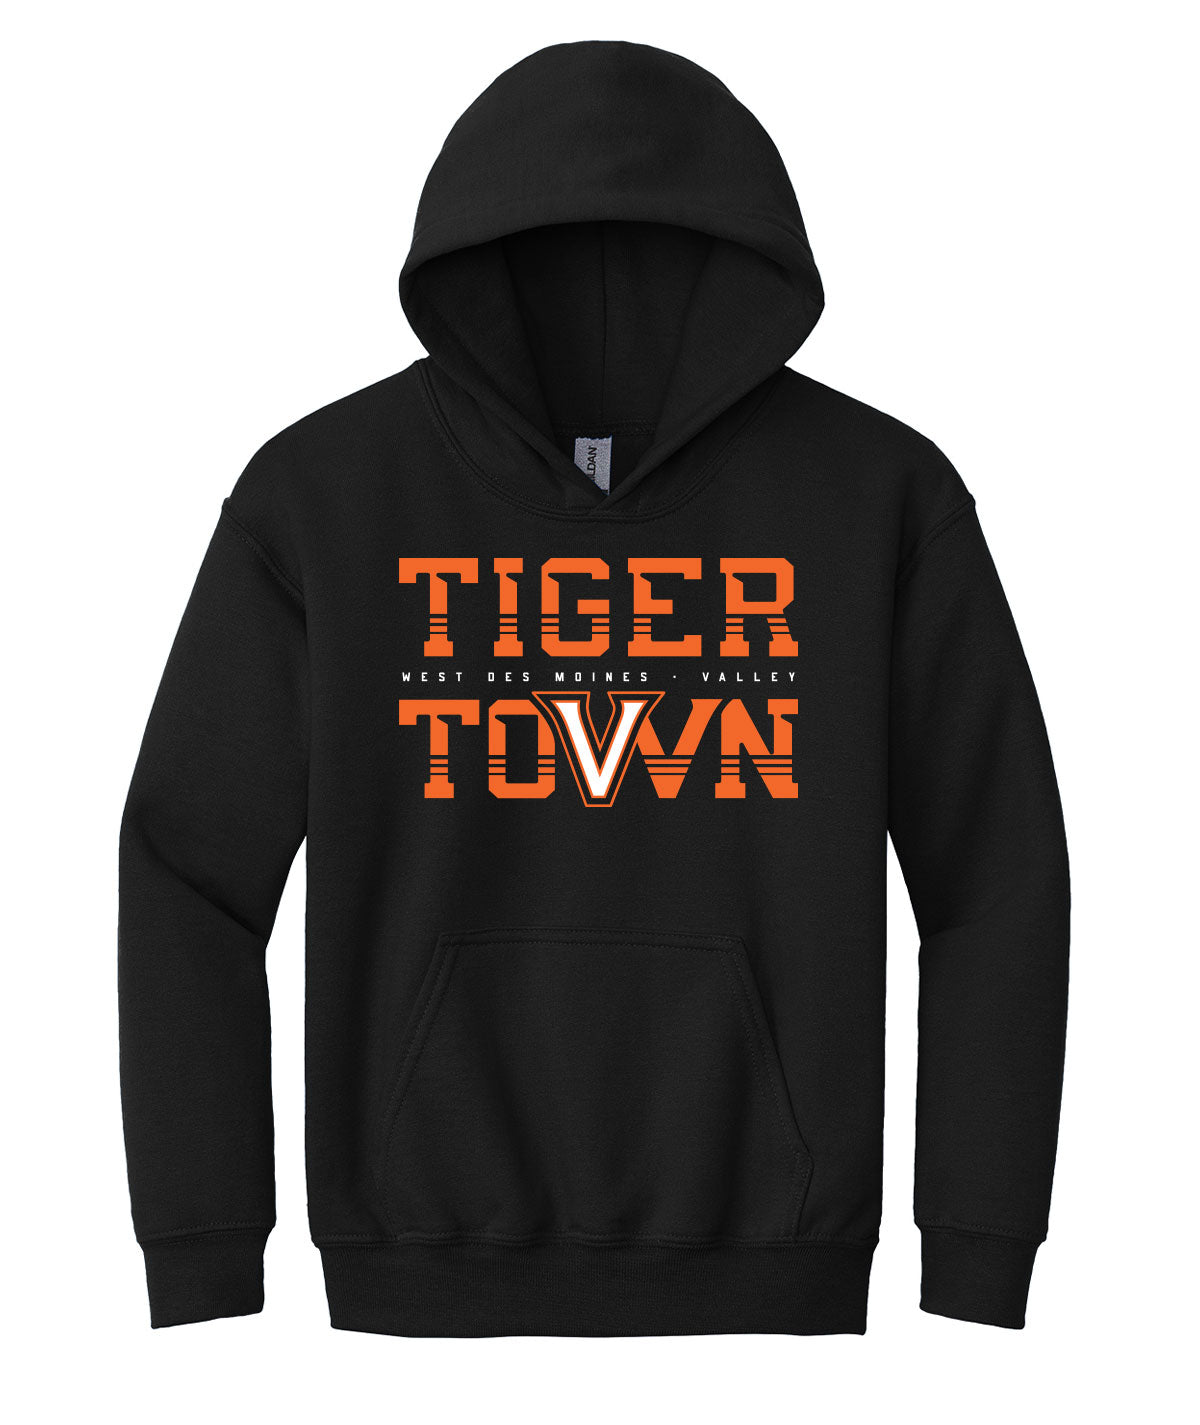 Tiger Town Youth Hooded Sweatshirt